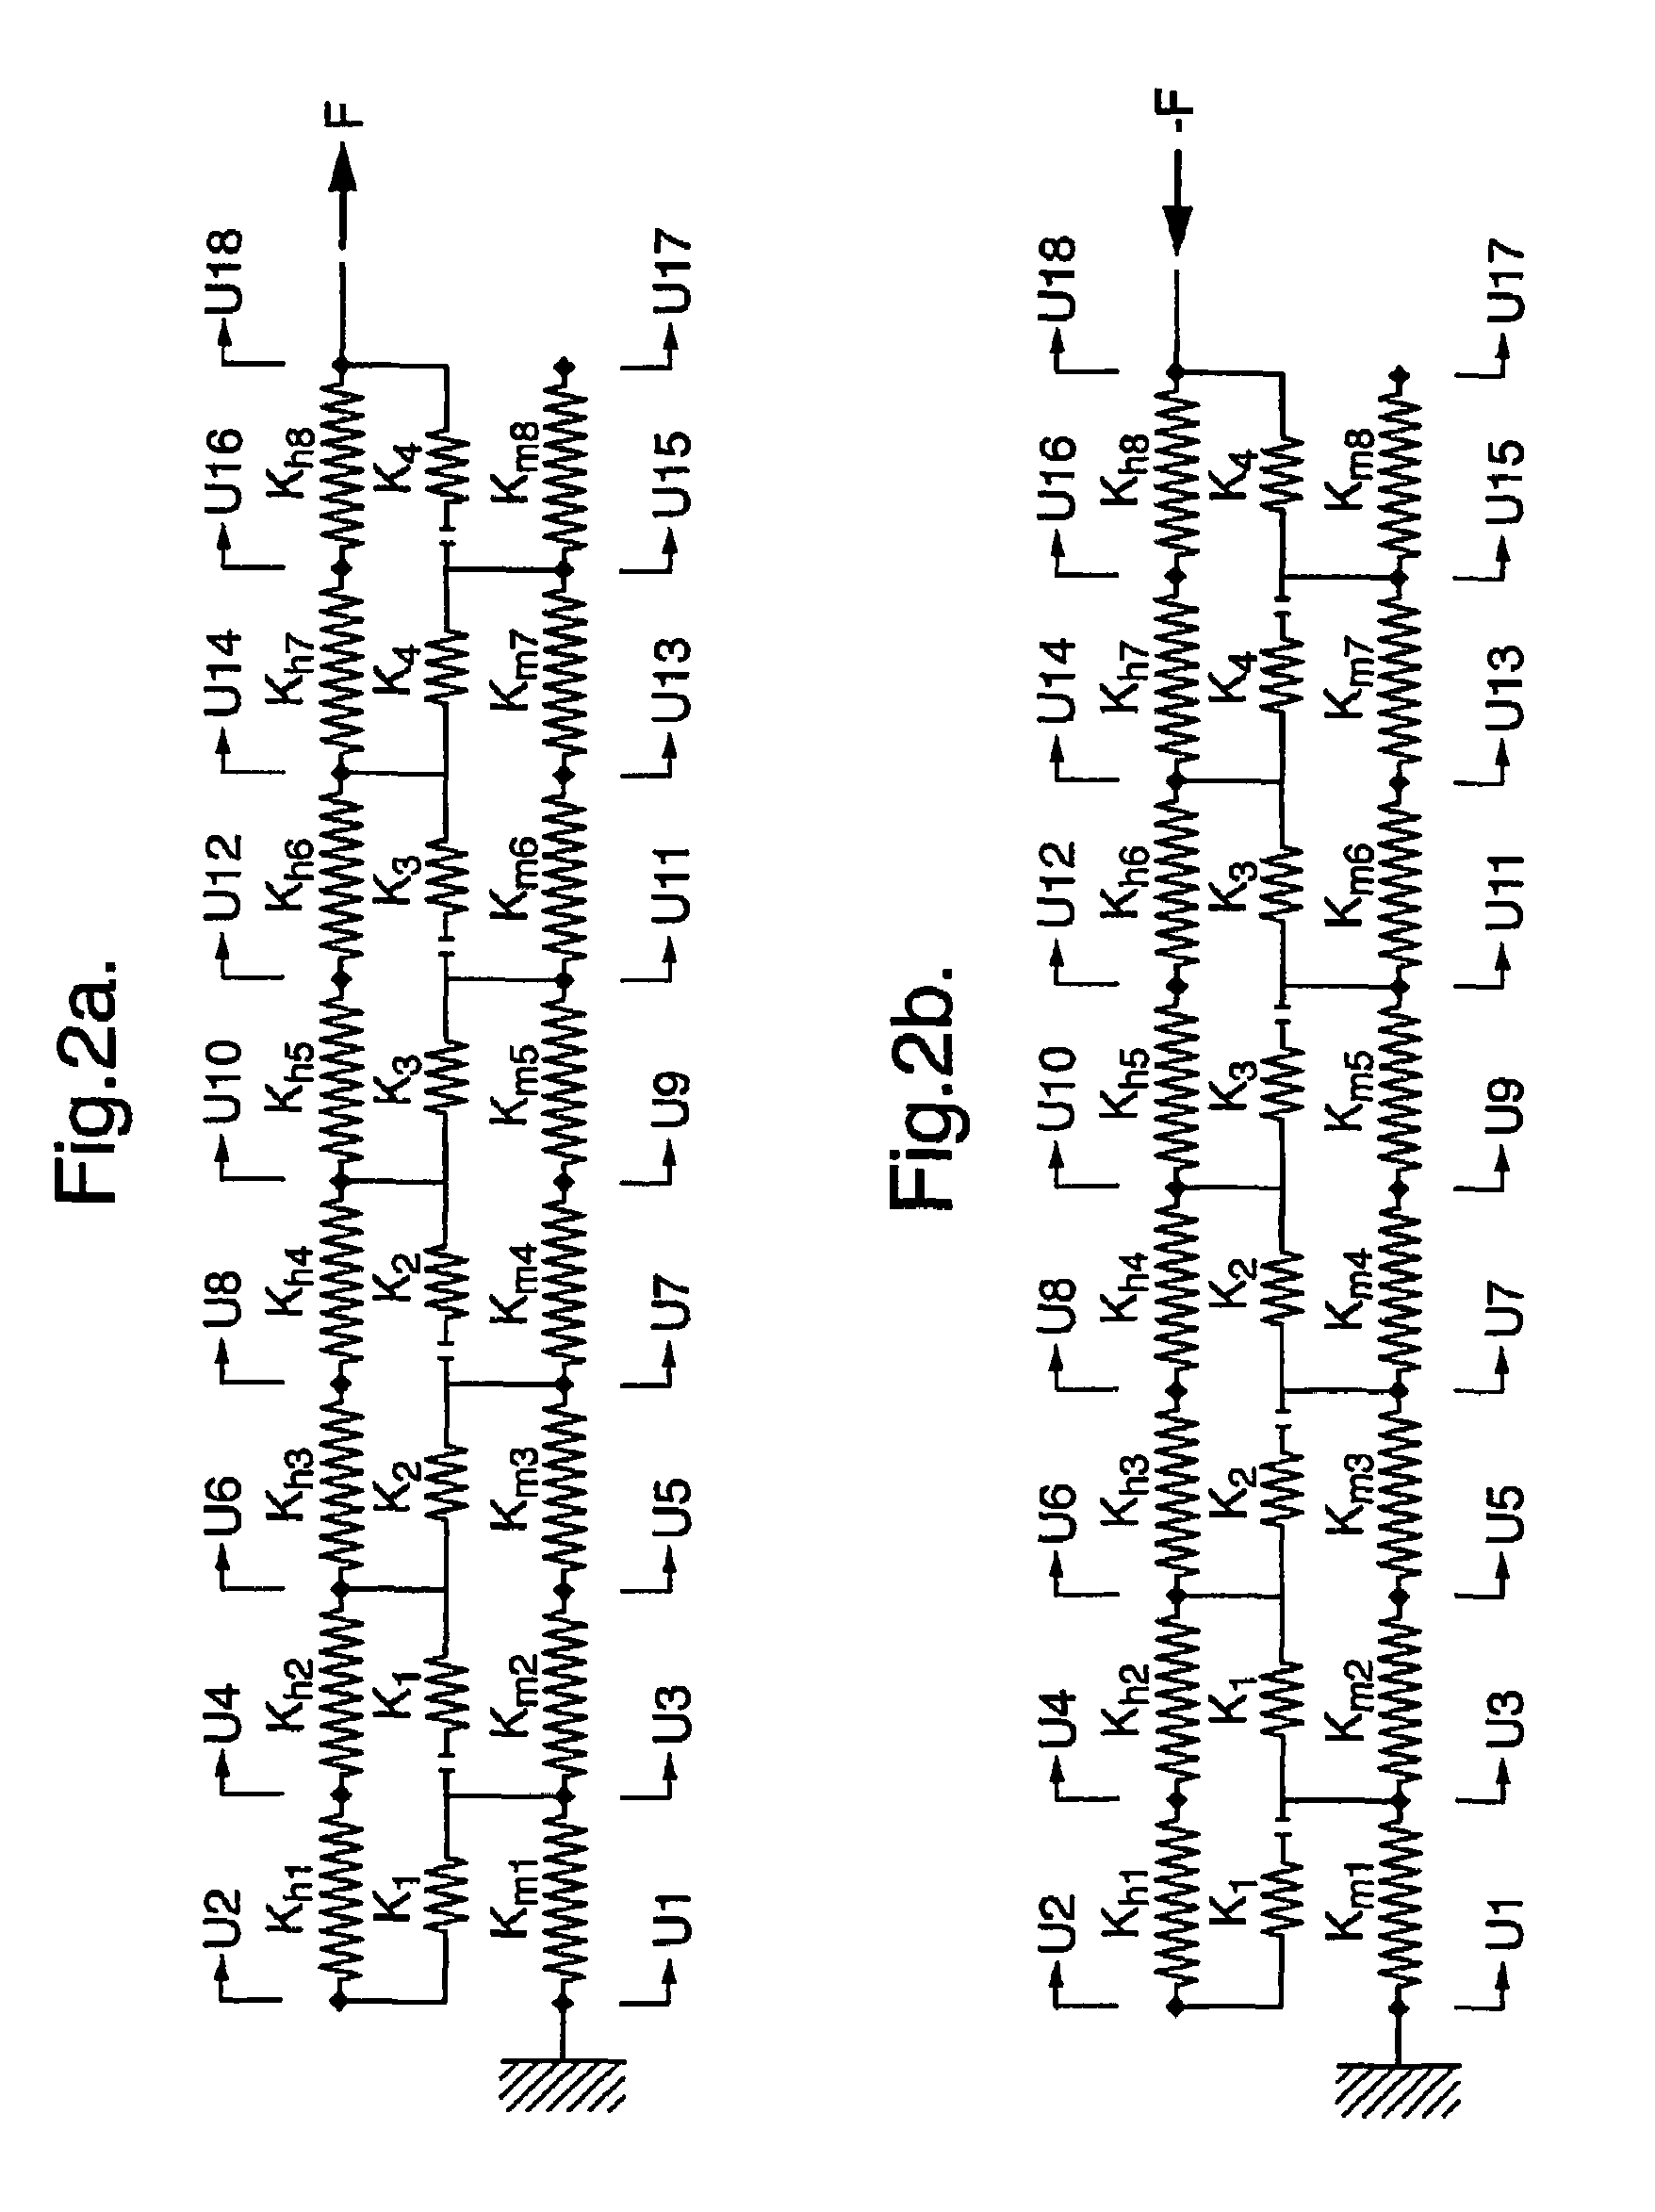 Bore hole tool assembly and method of designing same